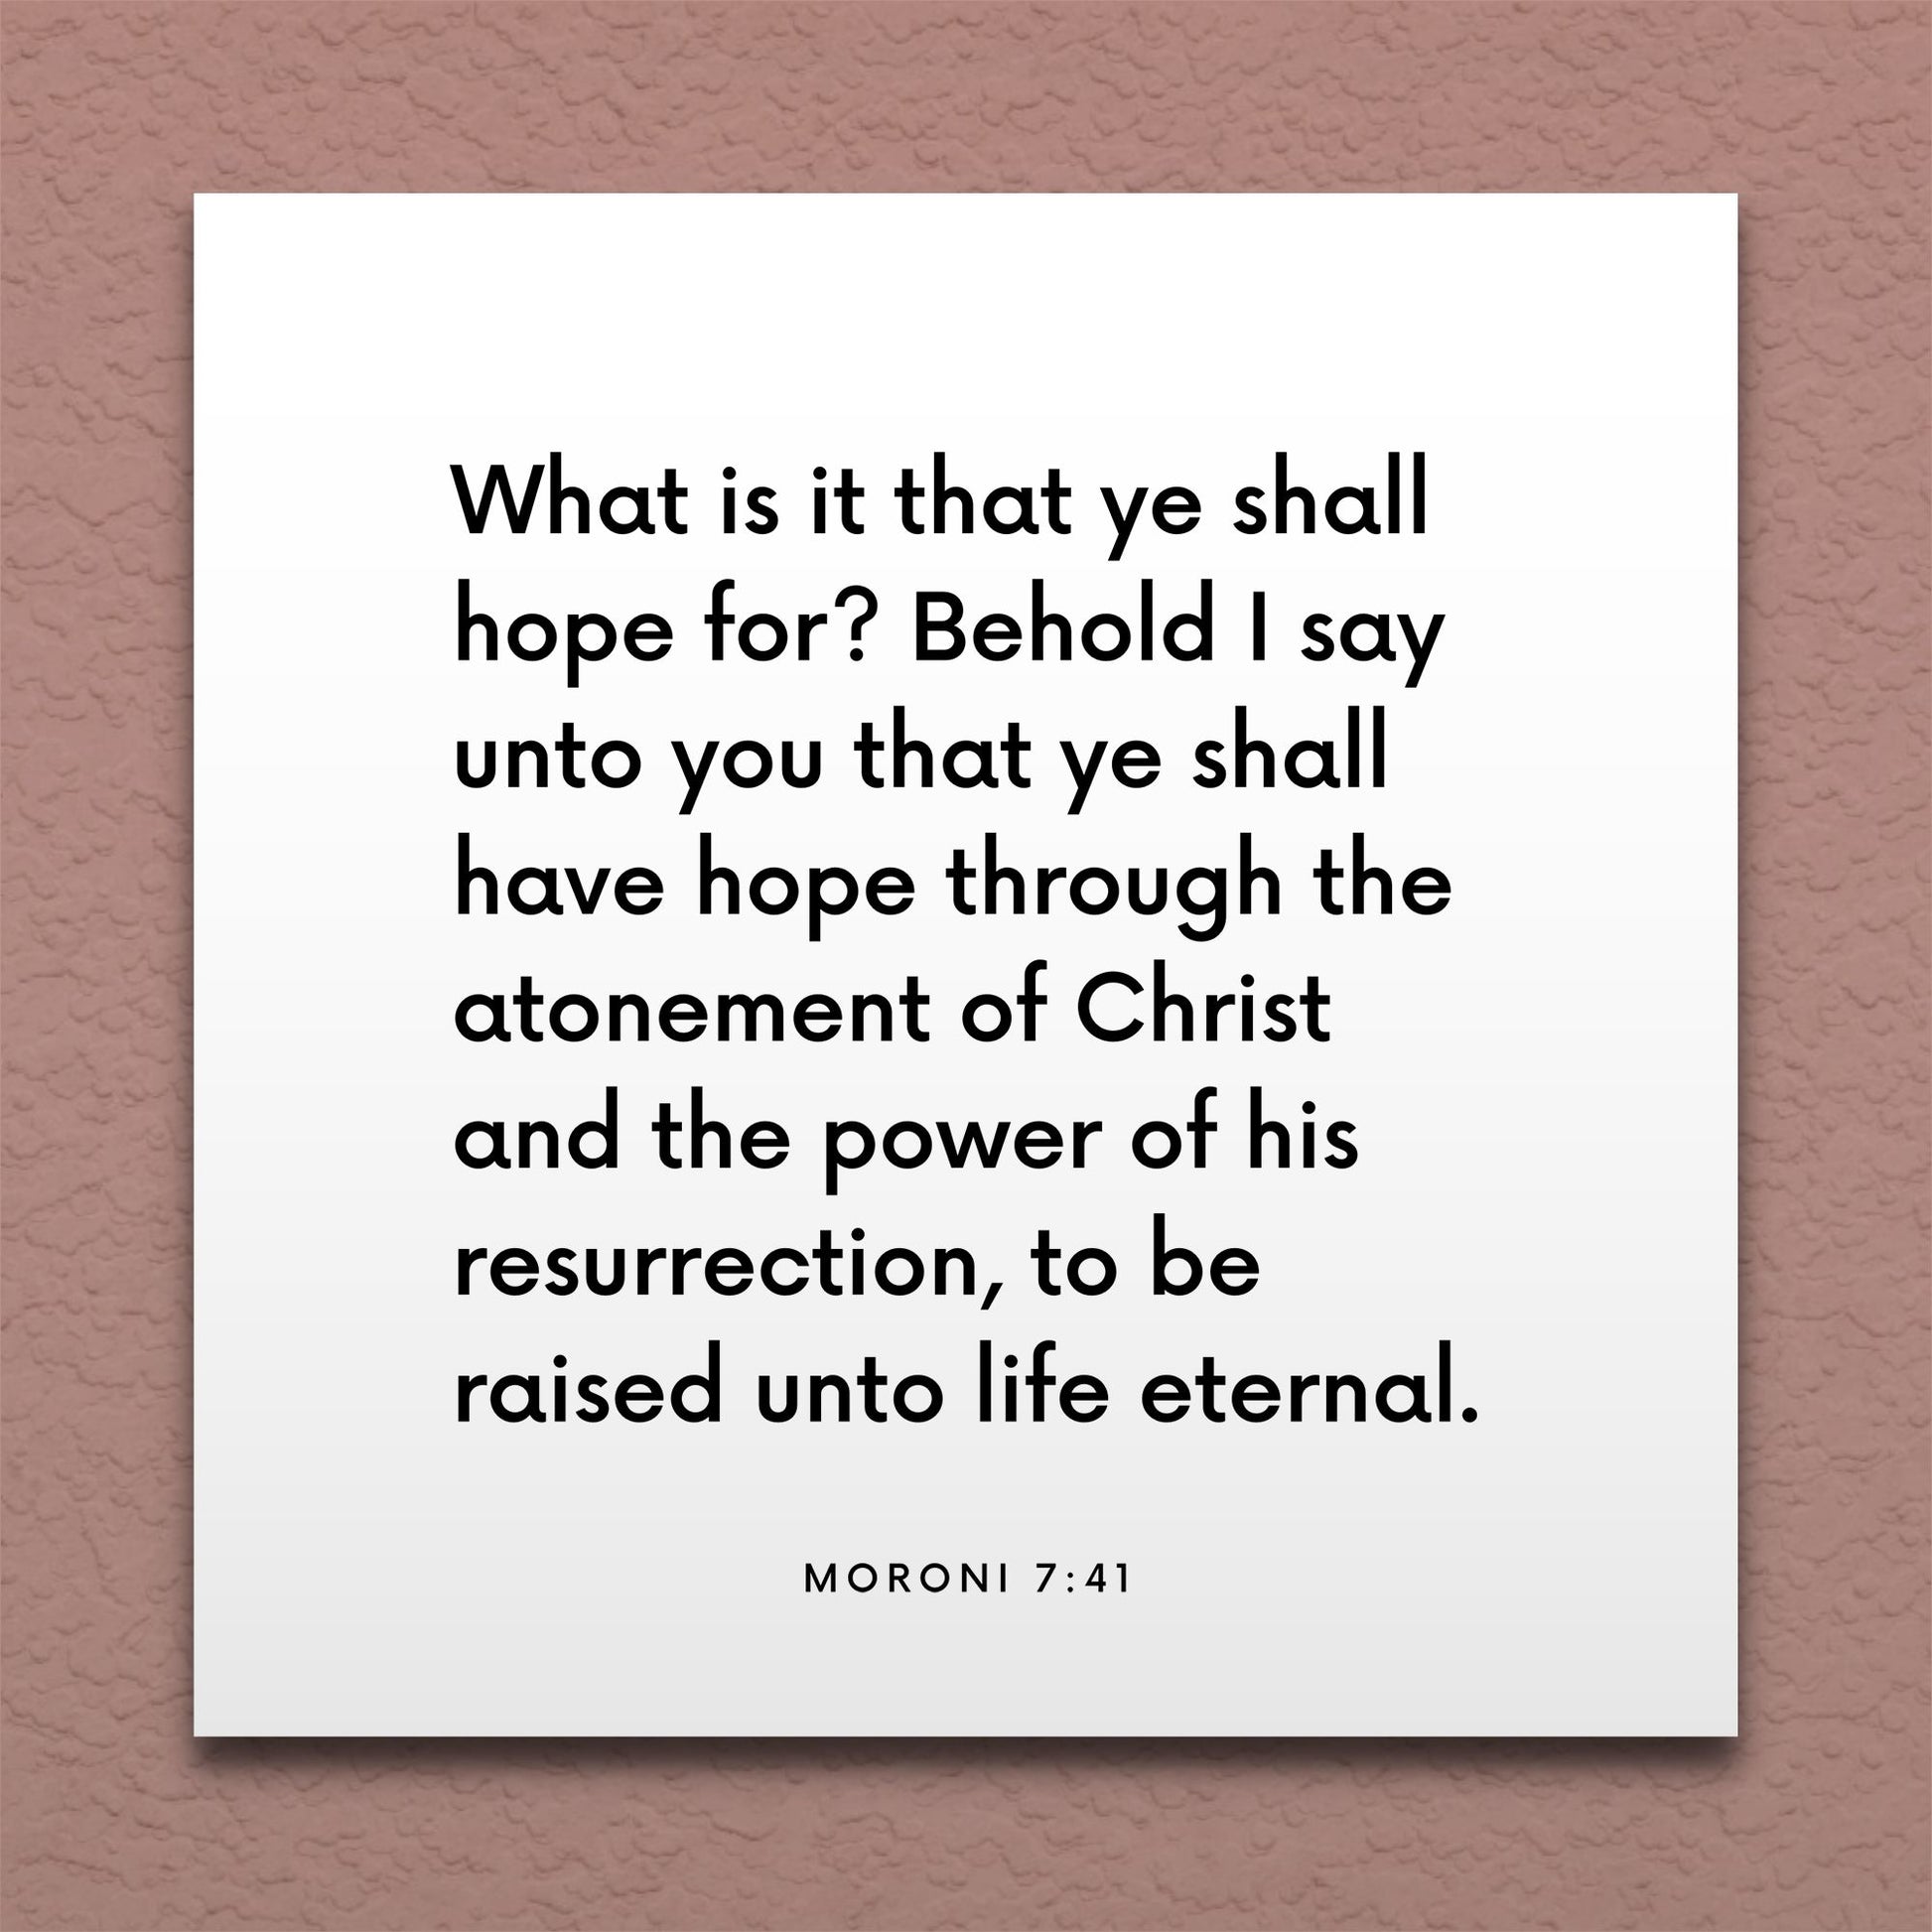 Wall-mounted scripture tile for Moroni 7:41 - "Ye shall have hope through the atonement of Christ"